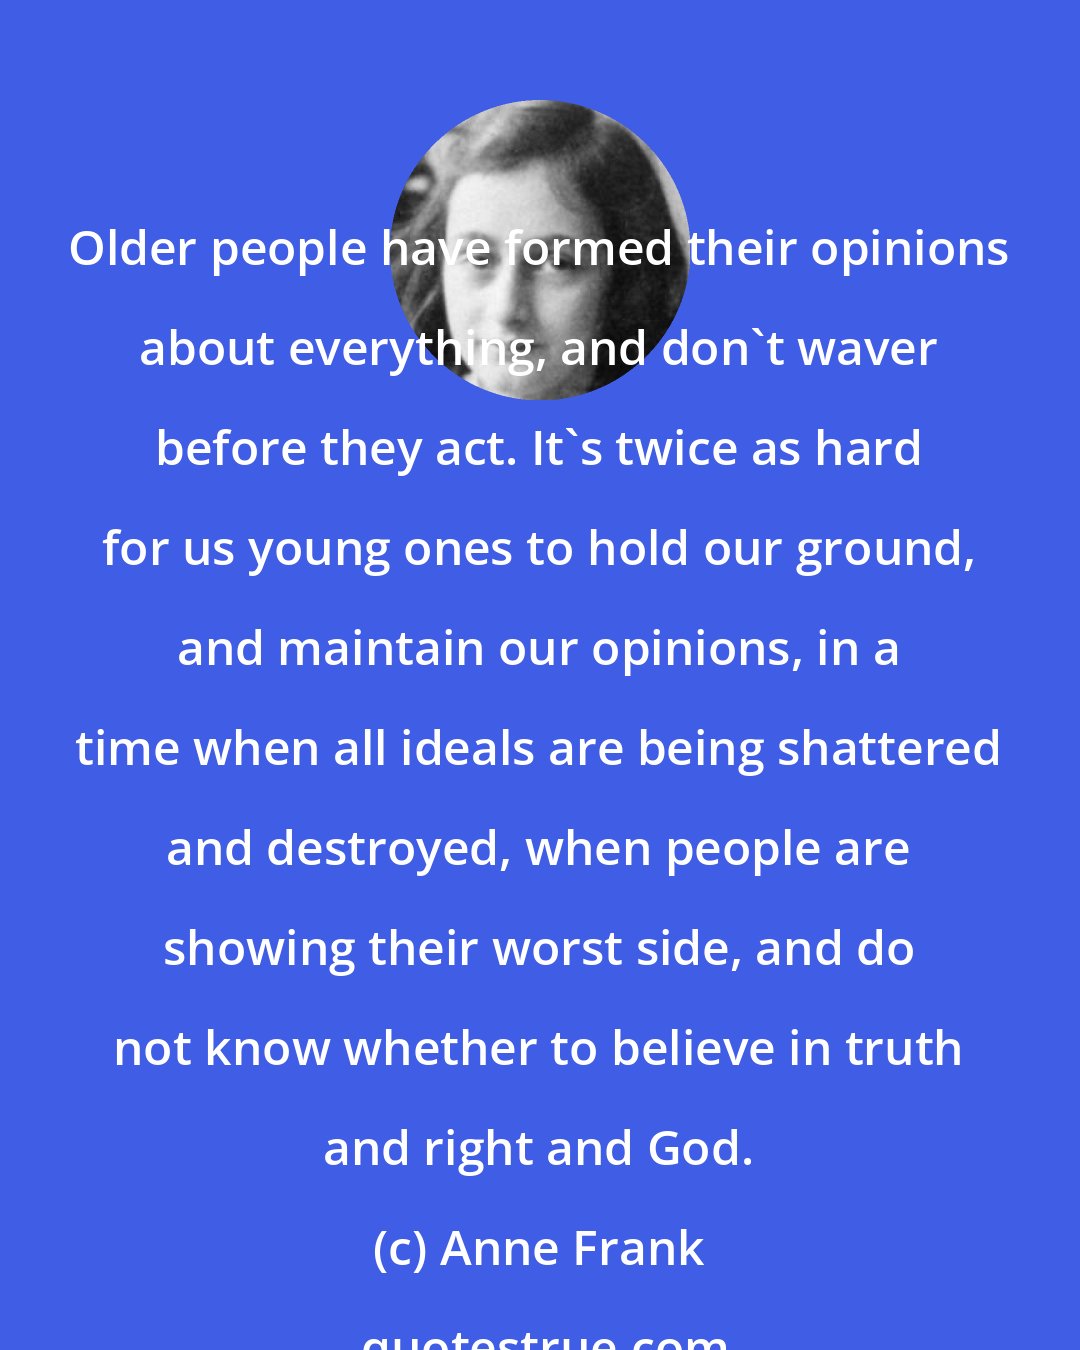 Anne Frank: Older people have formed their opinions about everything, and don't waver before they act. It's twice as hard for us young ones to hold our ground, and maintain our opinions, in a time when all ideals are being shattered and destroyed, when people are showing their worst side, and do not know whether to believe in truth and right and God.